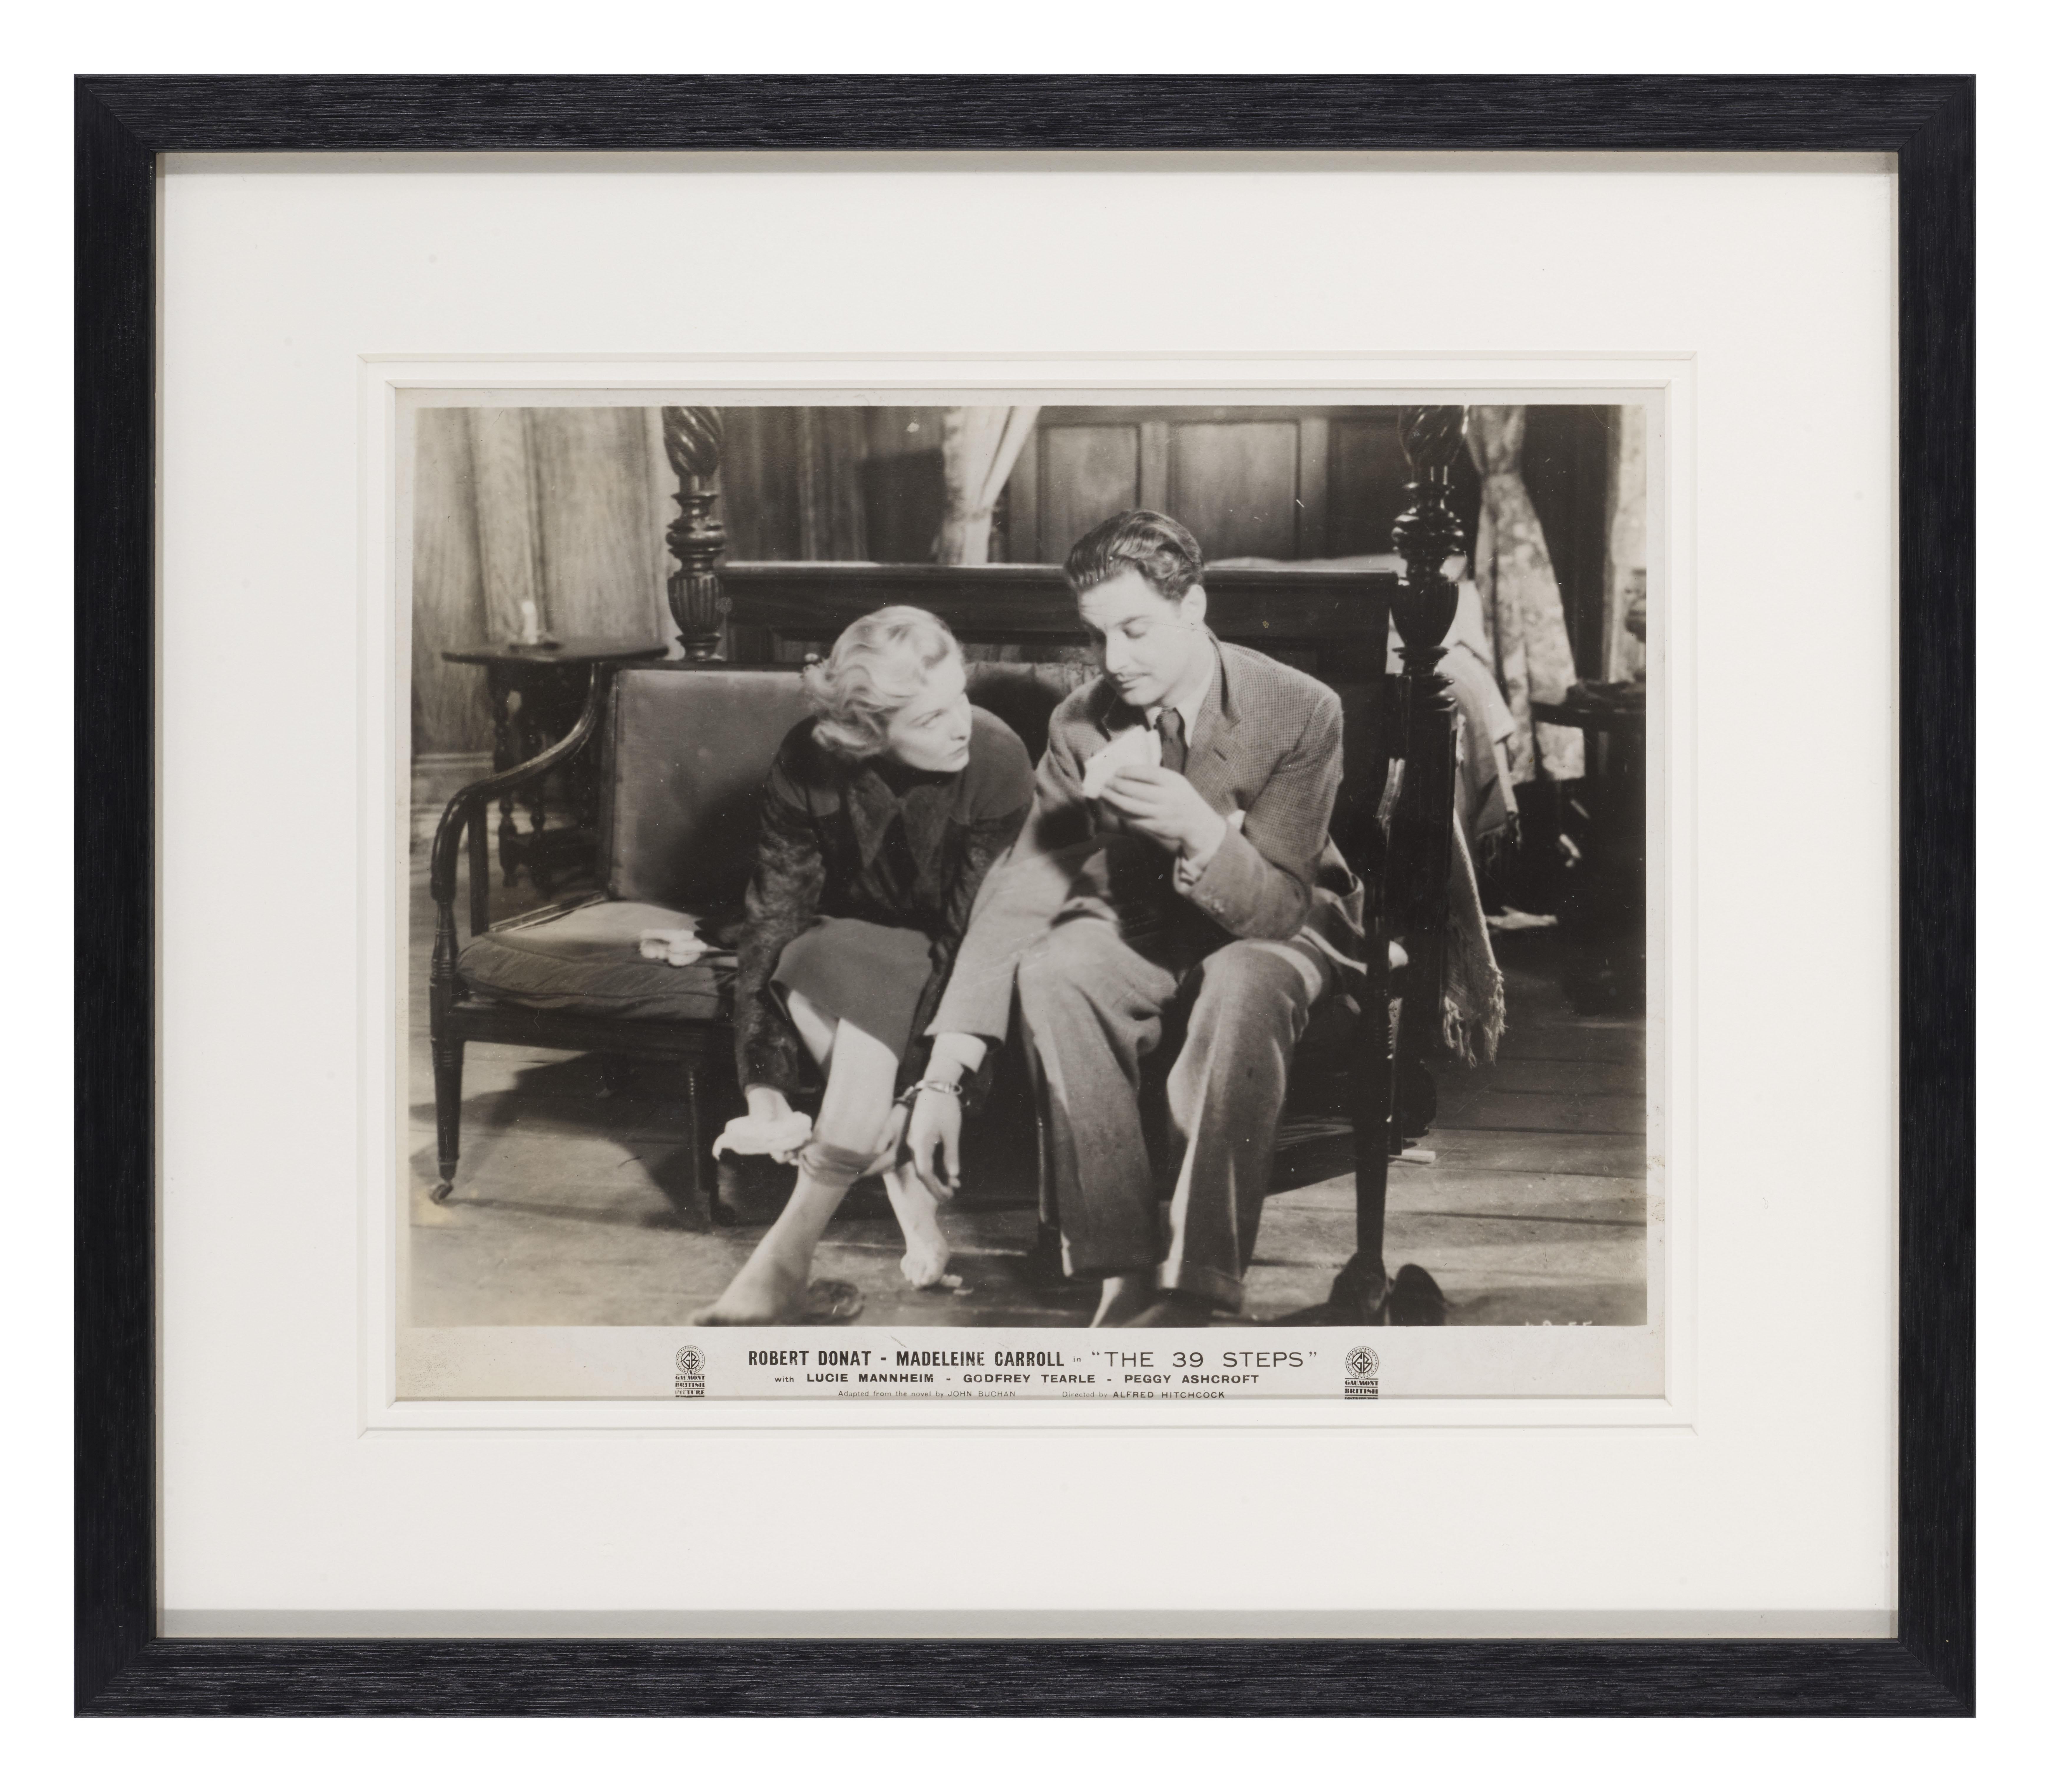 Original photographic production still for Alfred Hitchcock's 1935 crime thriller starring Robert Donat, Madeleine Carroll.
It is very difficult to find any original material on this legendary Hitchcock title.
This piece is Framed in a Sapele wood